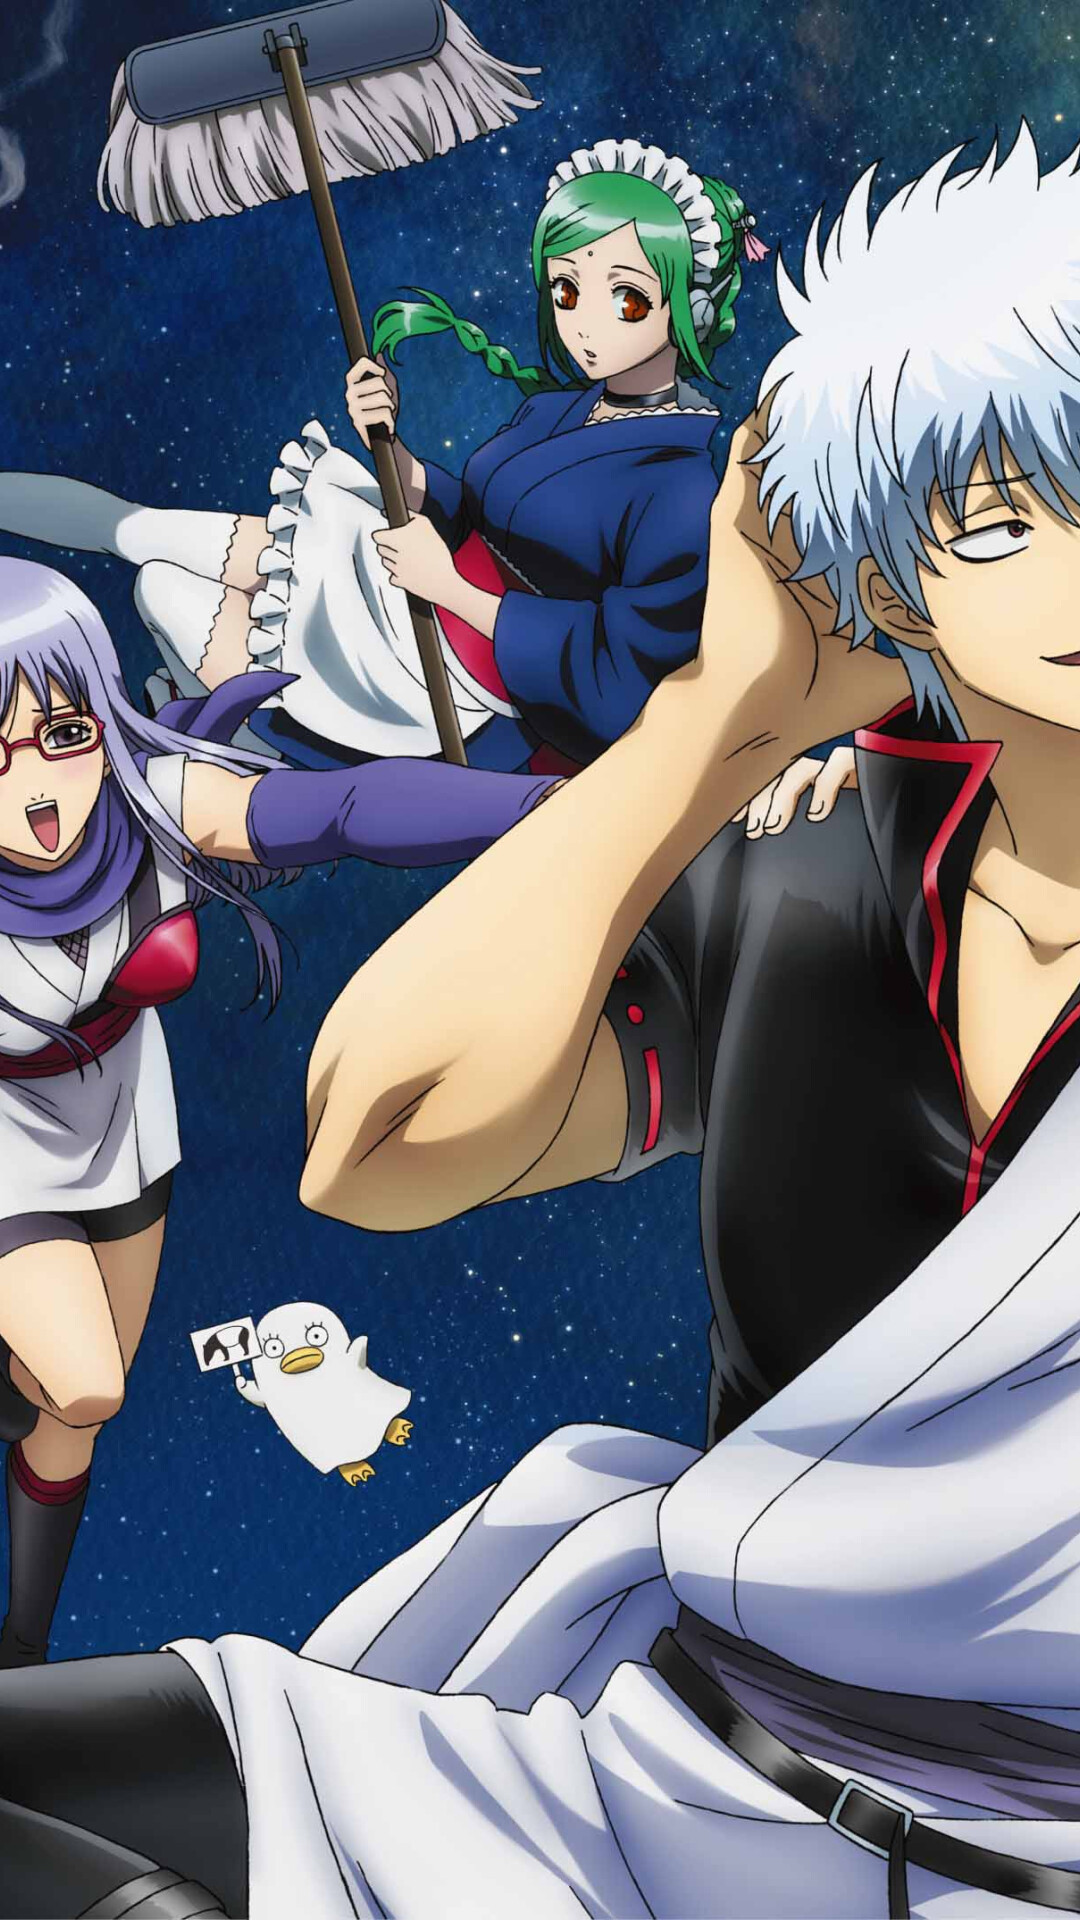 Gintama (TV Series): The series based on the manga premiered in 2011, Anime characters, TV Tokyo, 2011. 1080x1920 Full HD Wallpaper.